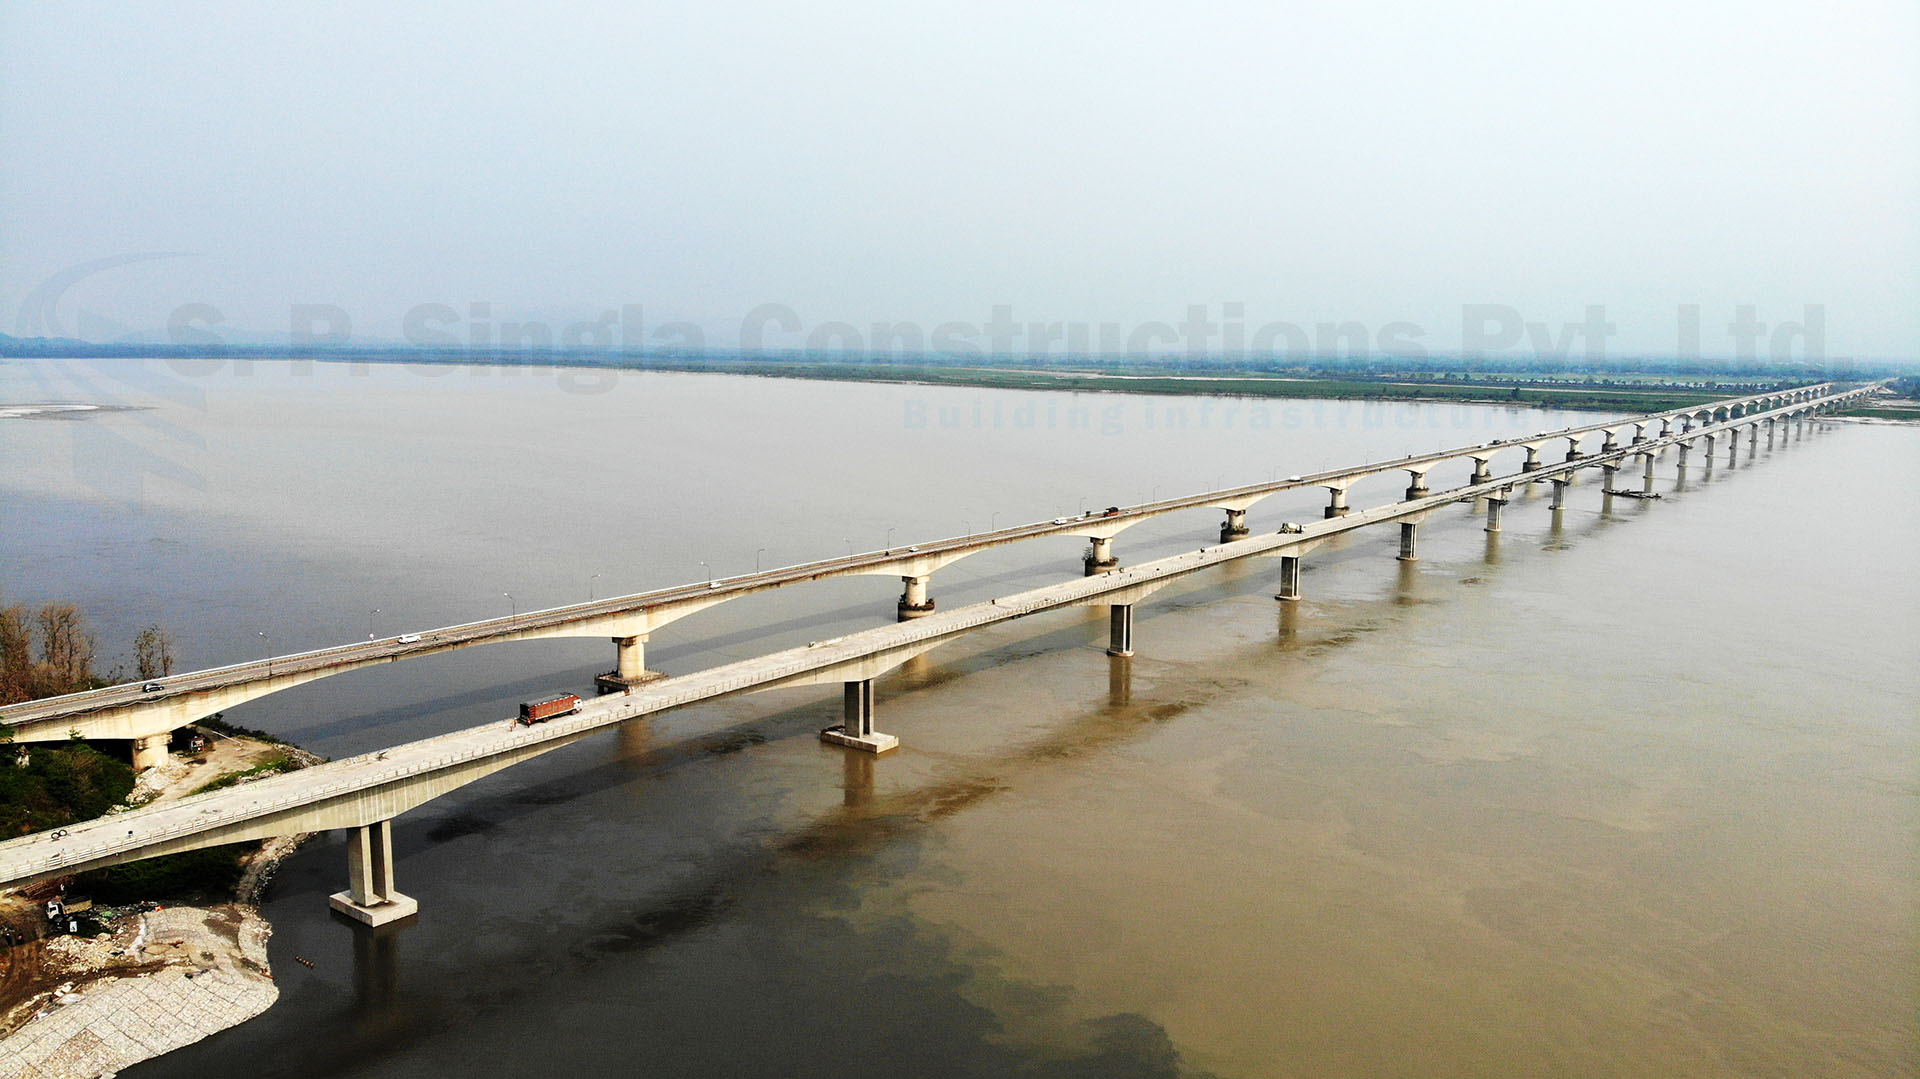 3.015 Km Long Balanced Cantilever Bridge across river Brahmputra in the state of Assam